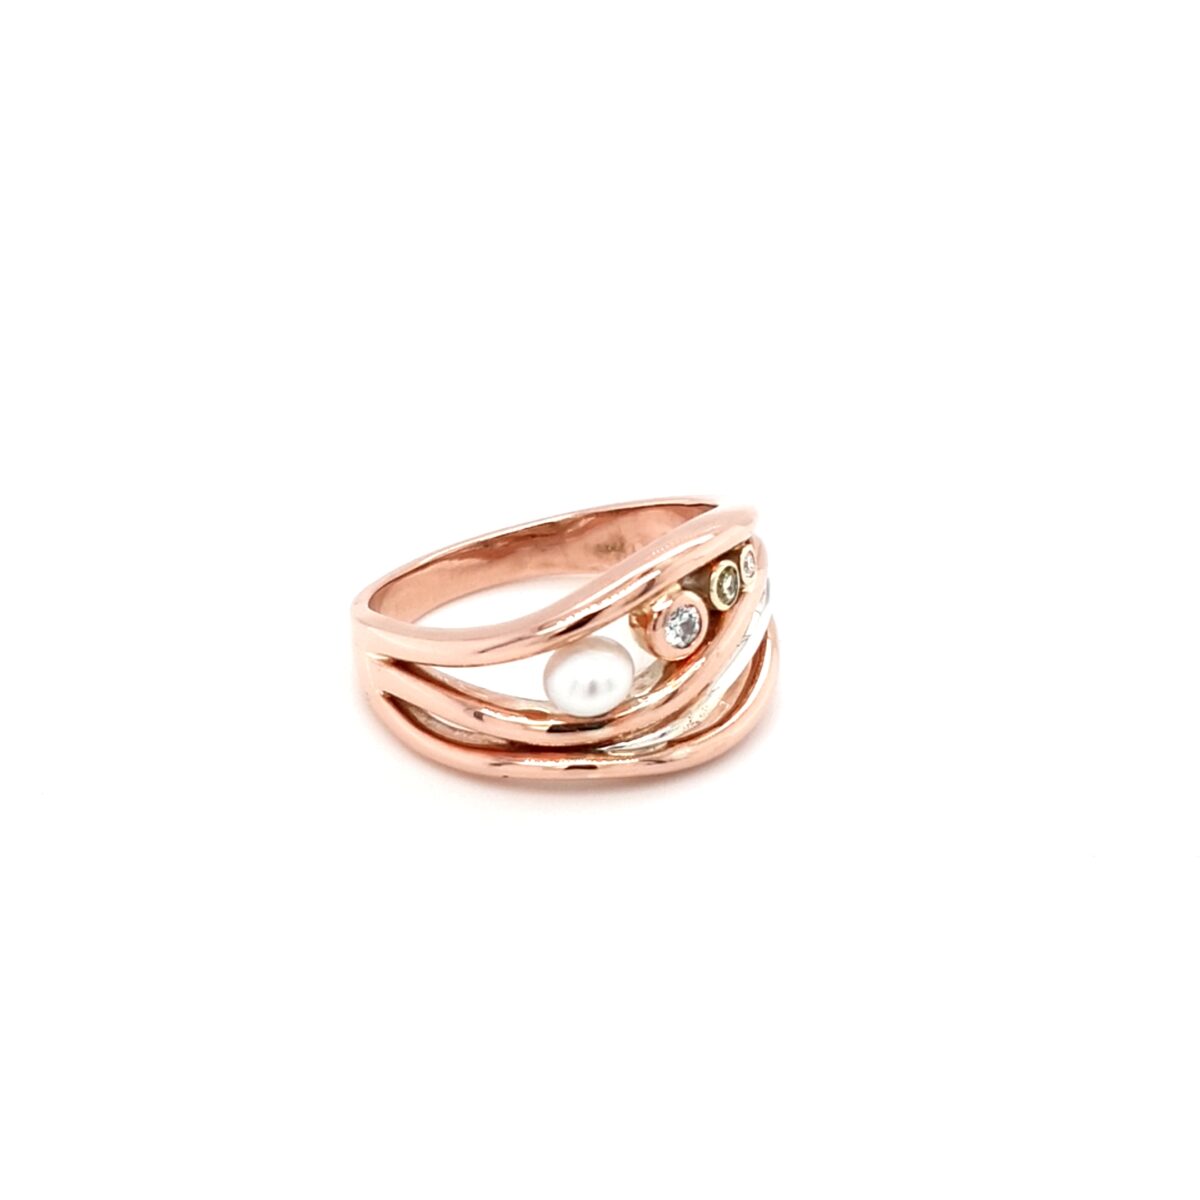 Leon Bakers Handmade 9K Rose Gold and Stirling Silver Coral Bay Wave Ring_2